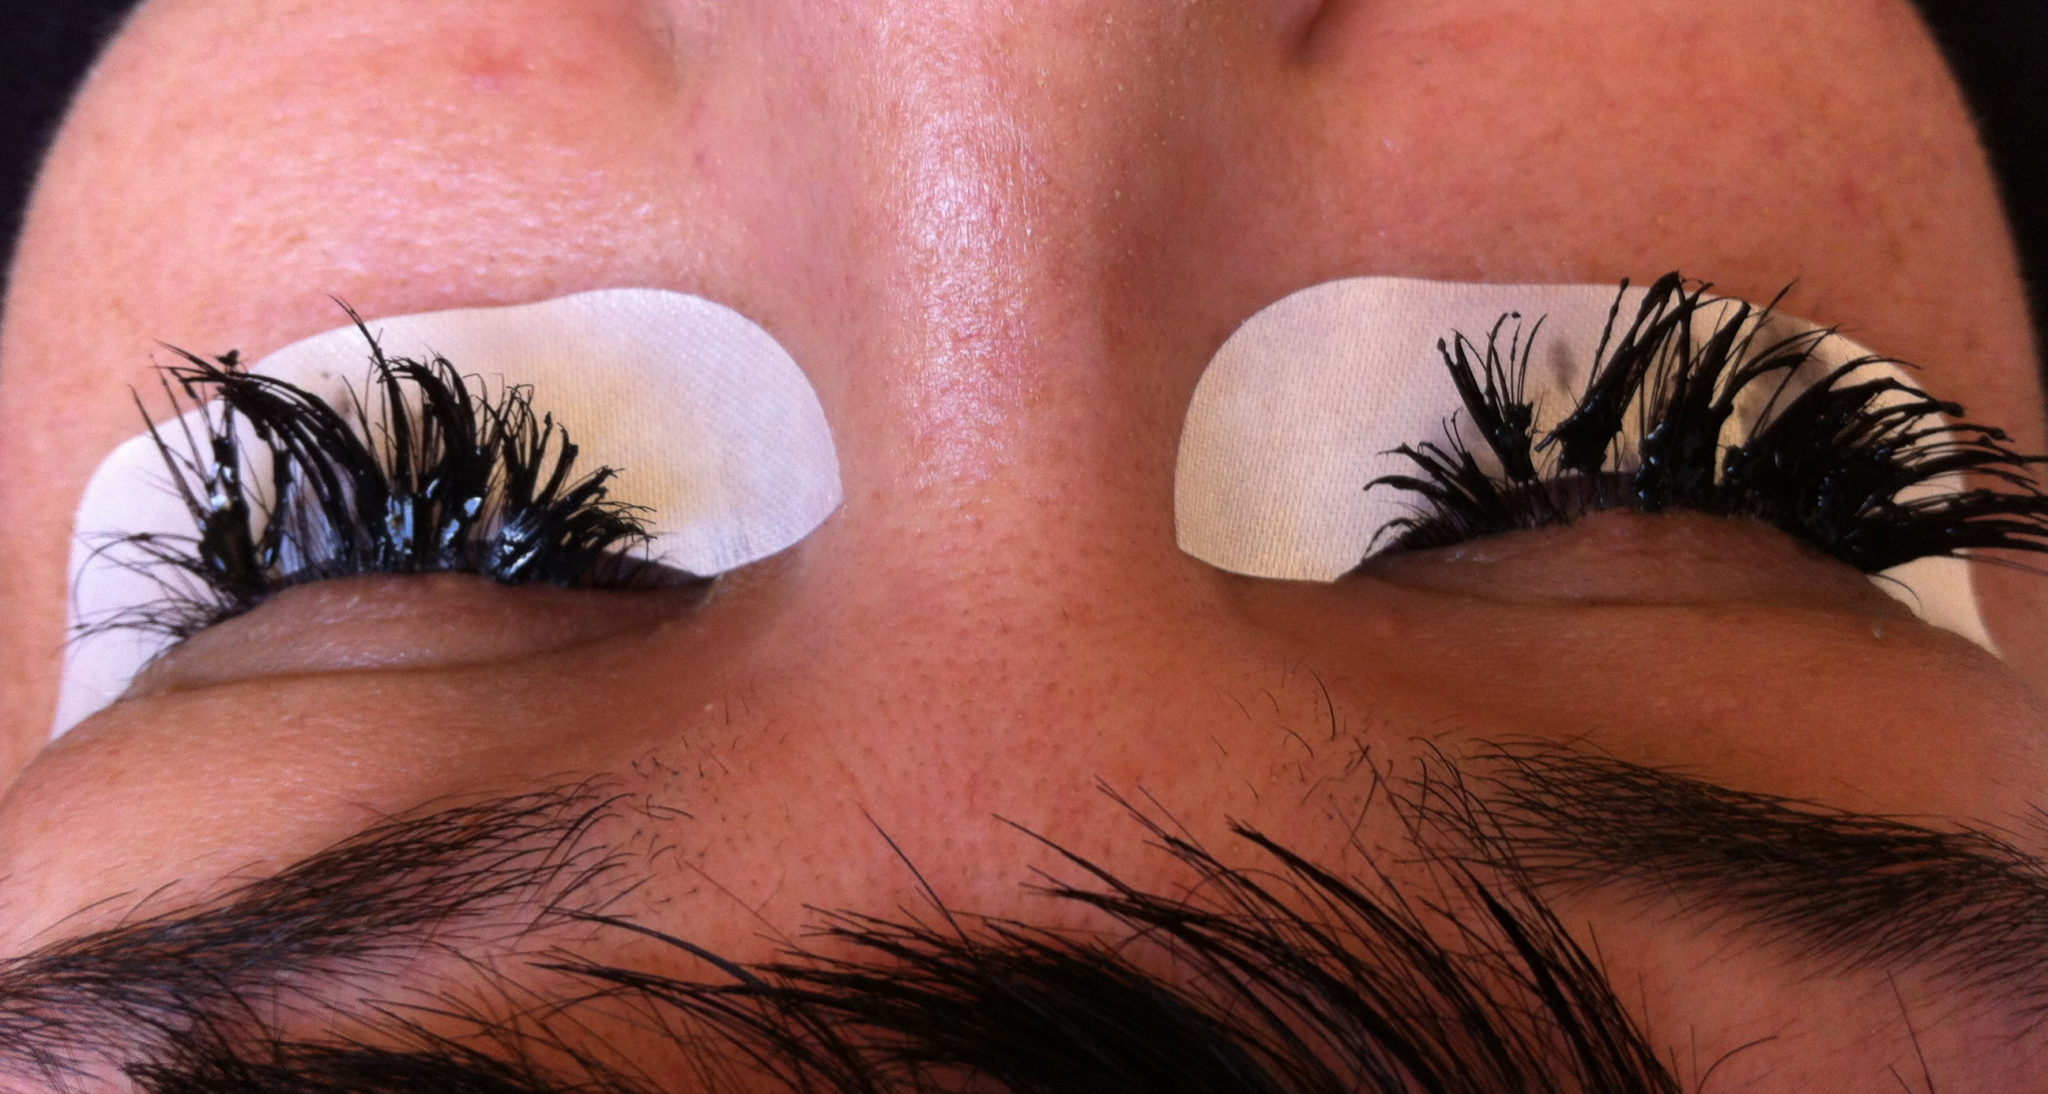 Lace It Up- DIY Lash Extensions without the Price